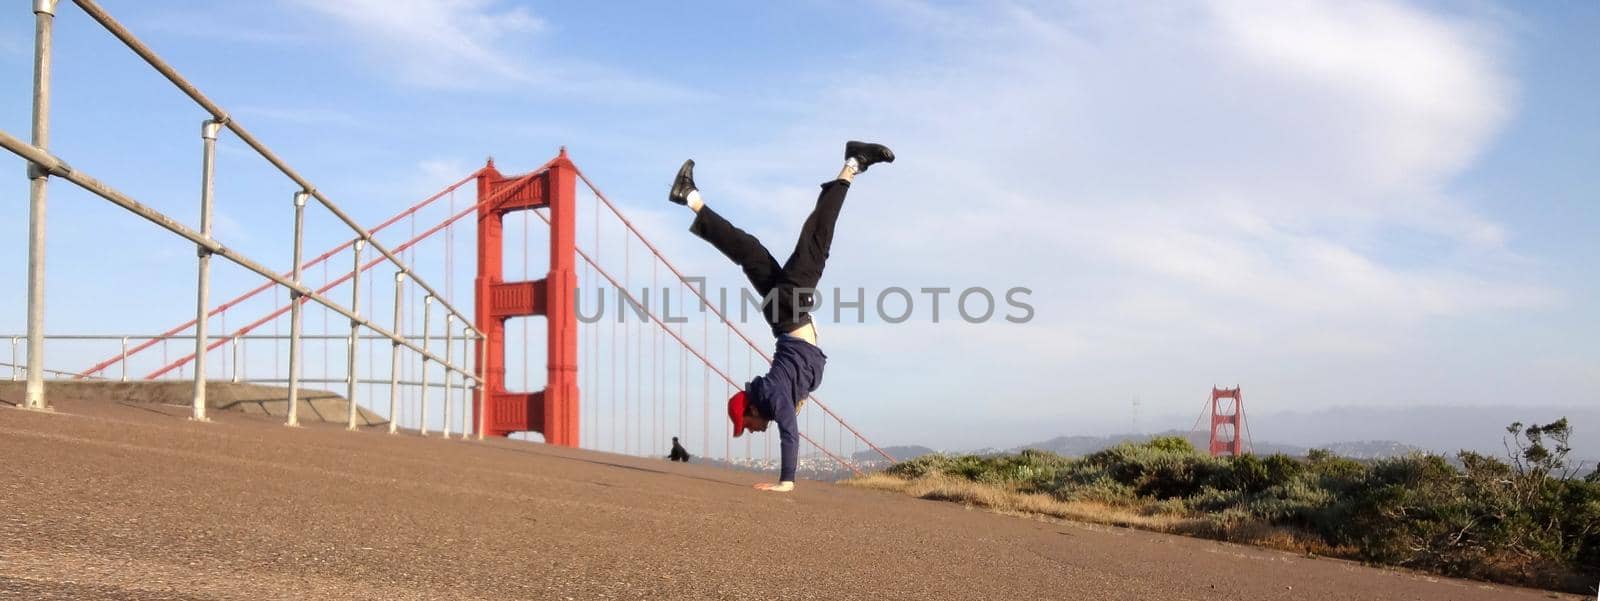 Man wearing hat, hoodie, long pants and shoes Handstands in front of the Golden Gate Bridge by EricGBVD